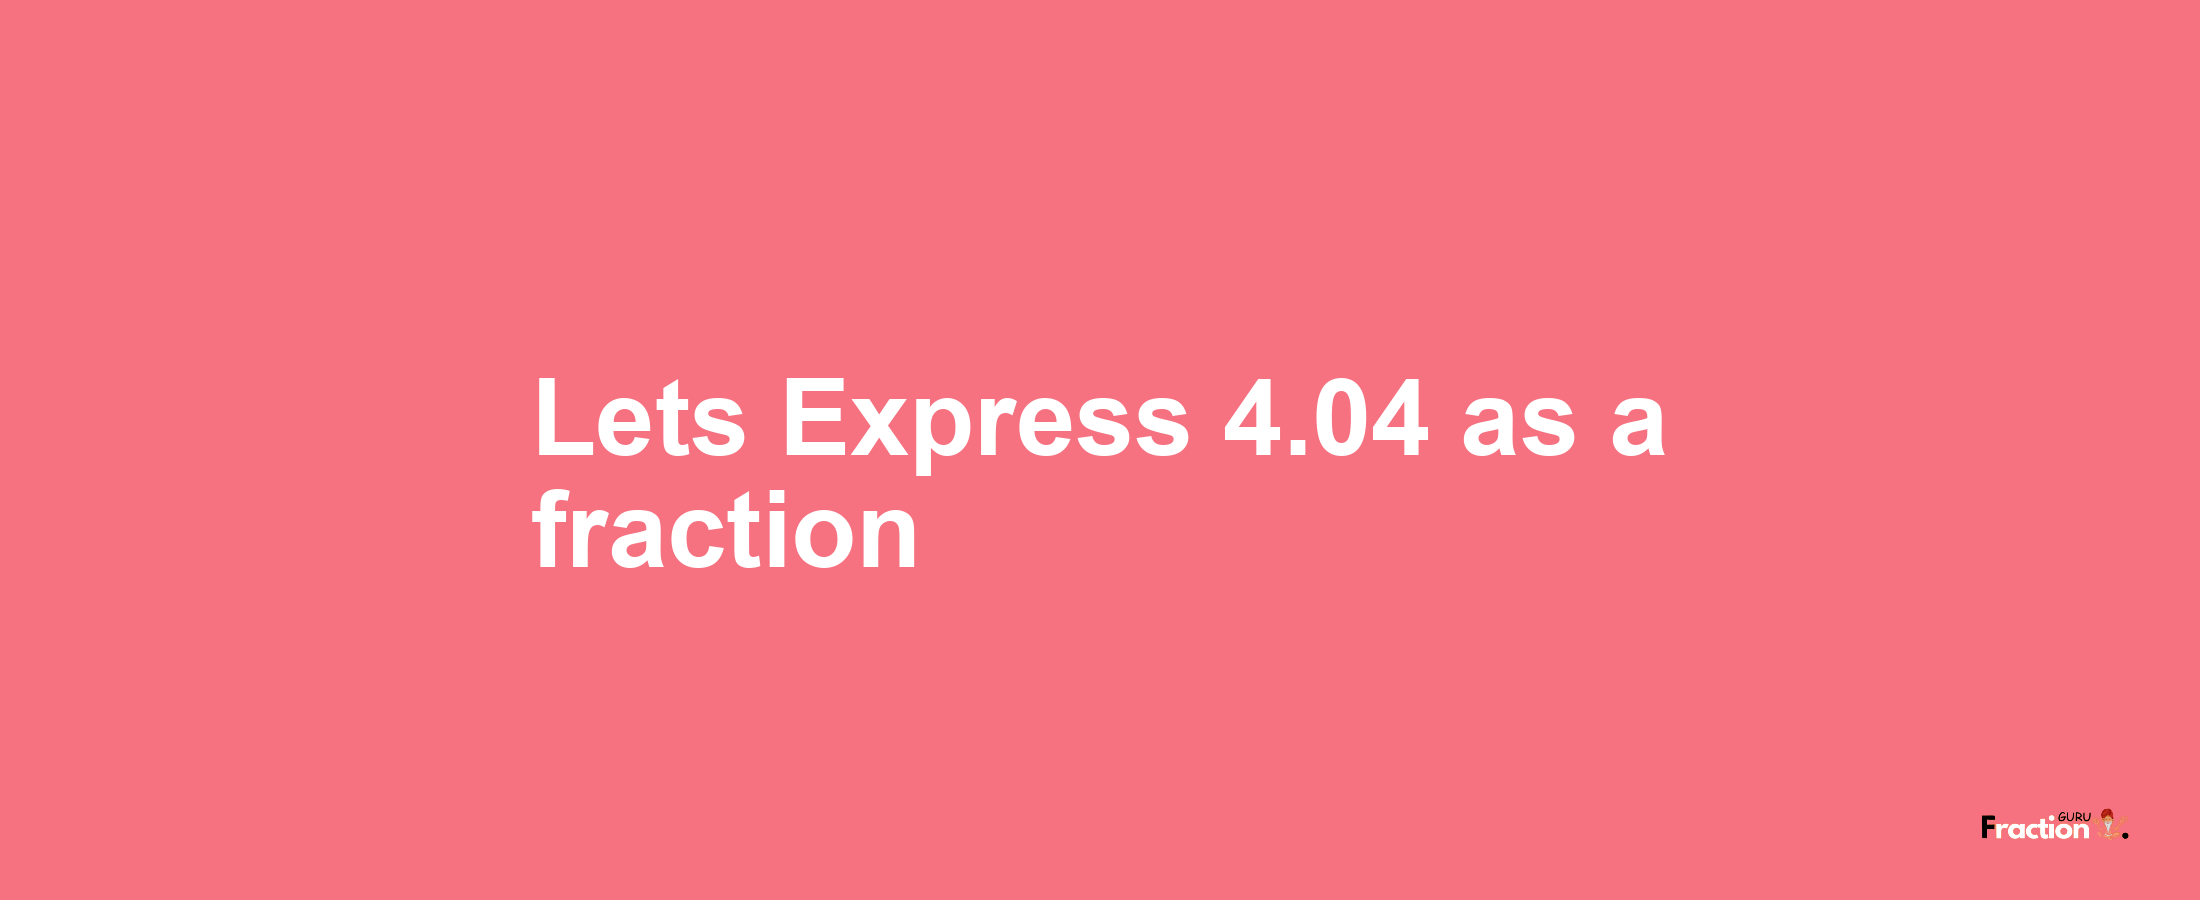 Lets Express 4.04 as afraction